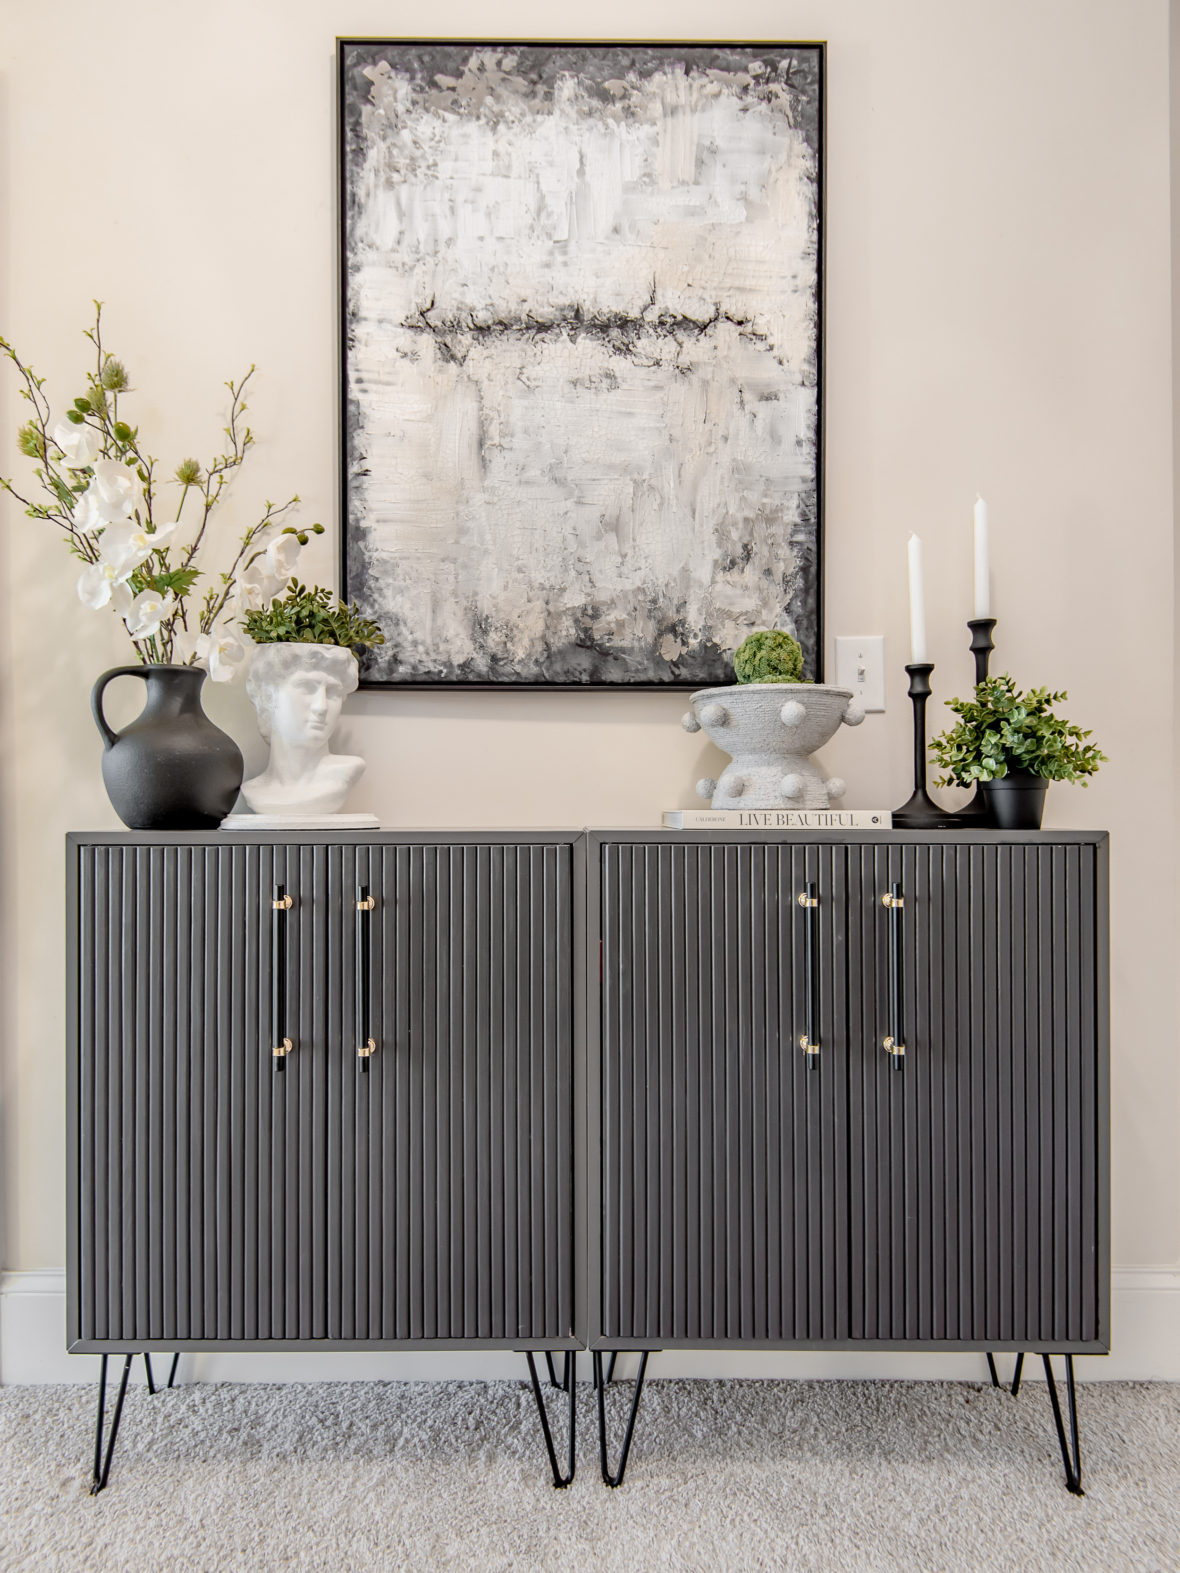 black home decor, how to decorate with black,best ikea hacks, ikea eket hack, ikea hacks, best ikea hacks, diy fluted console, gray and black home decor, decorating with black, modern mid century fluted console, easy ikea upgrades, diy fluted sideboard, budget friendly fluted sideboard, diy fluted sideboard